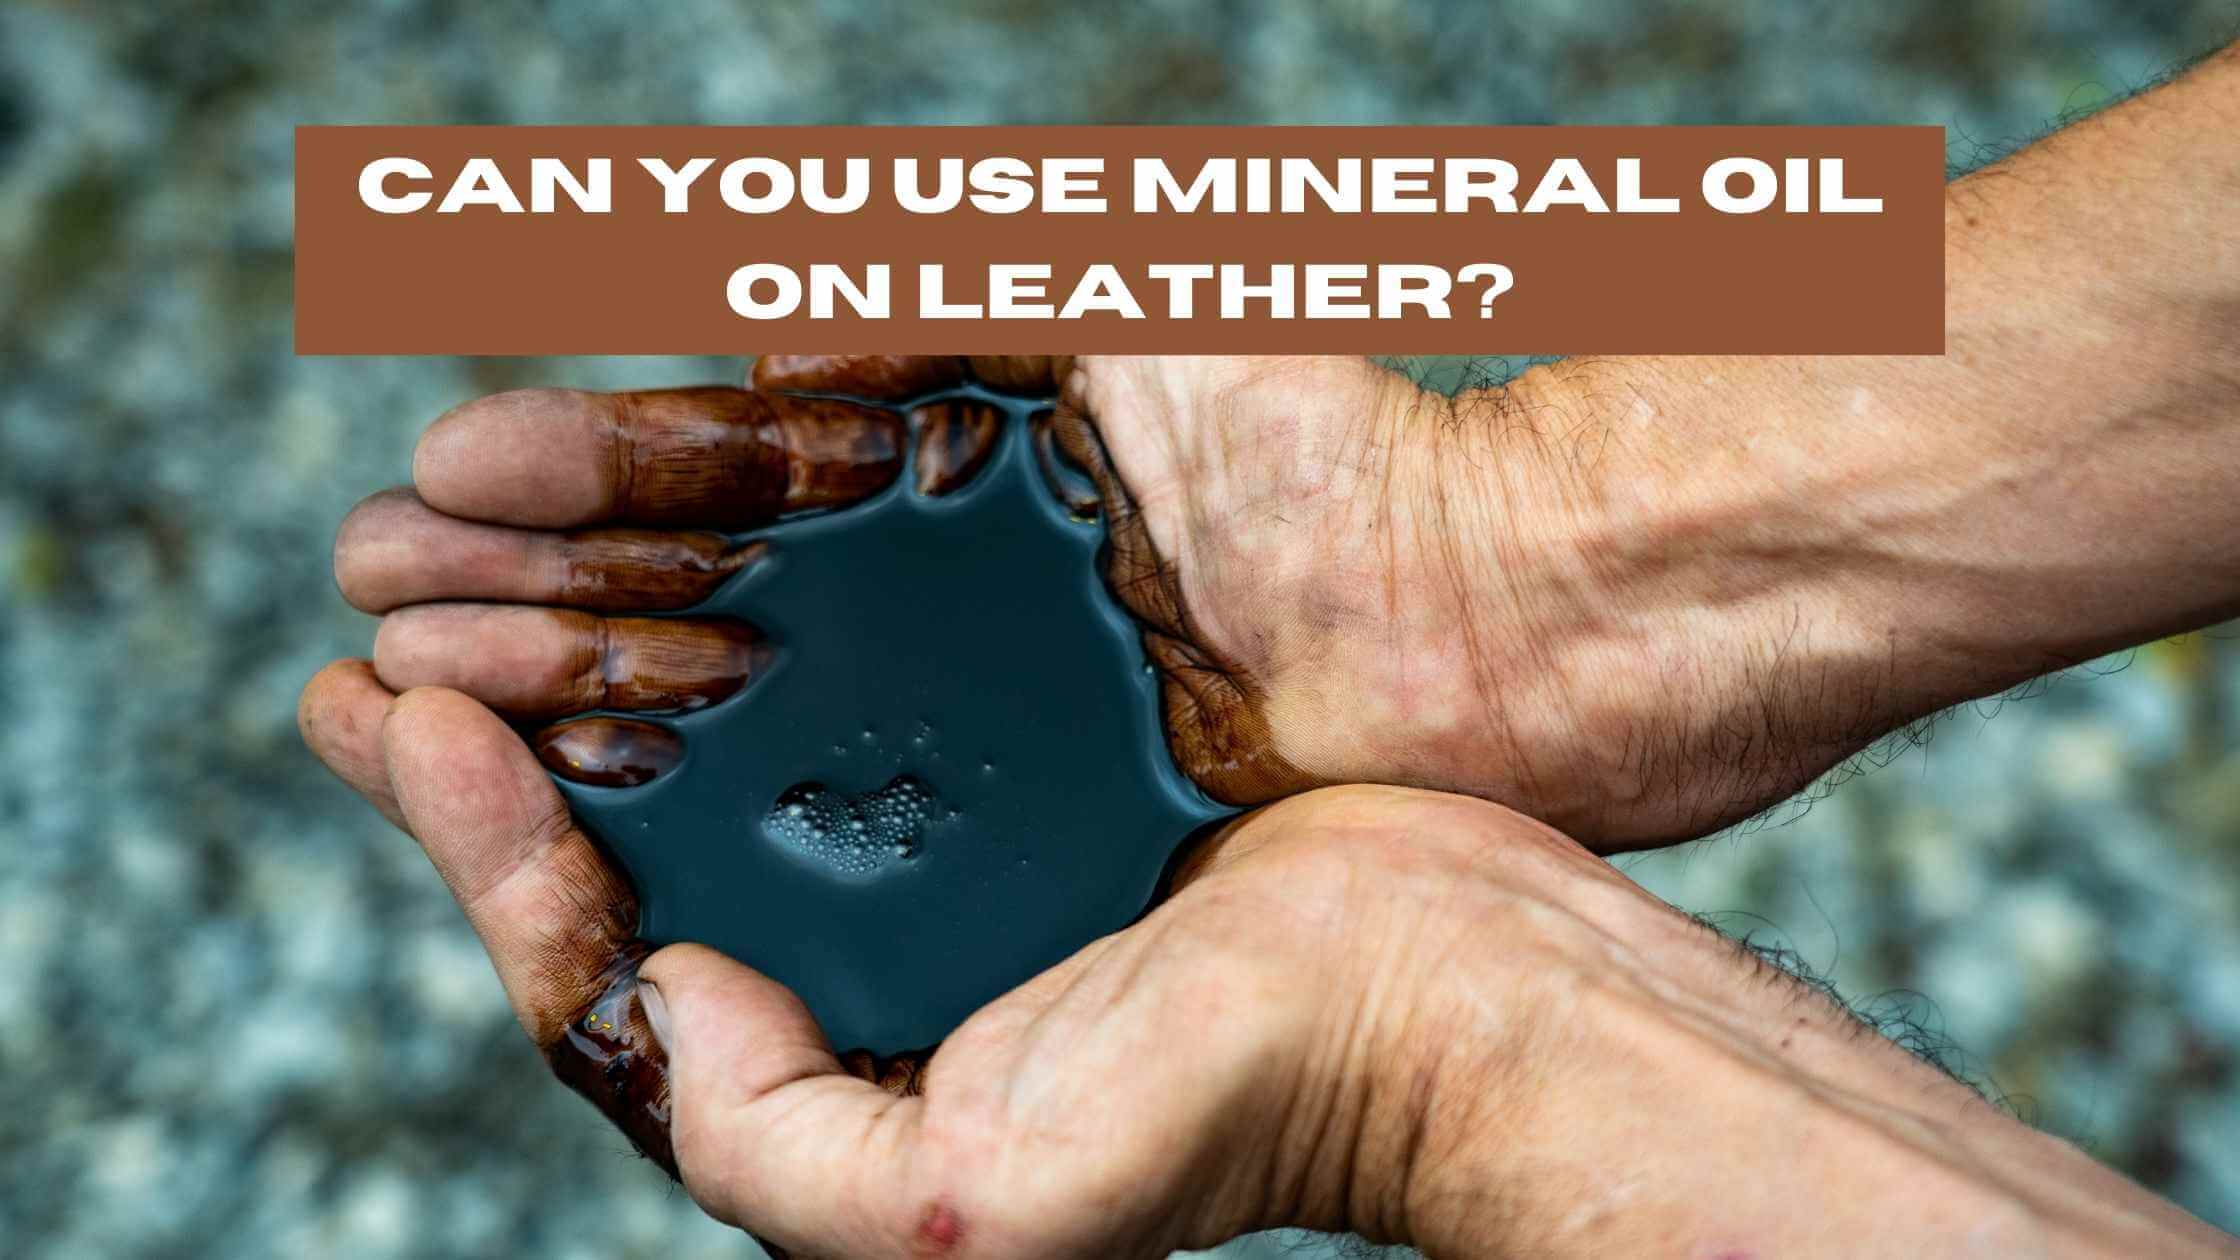 Can You Use Mineral Oil on Leather